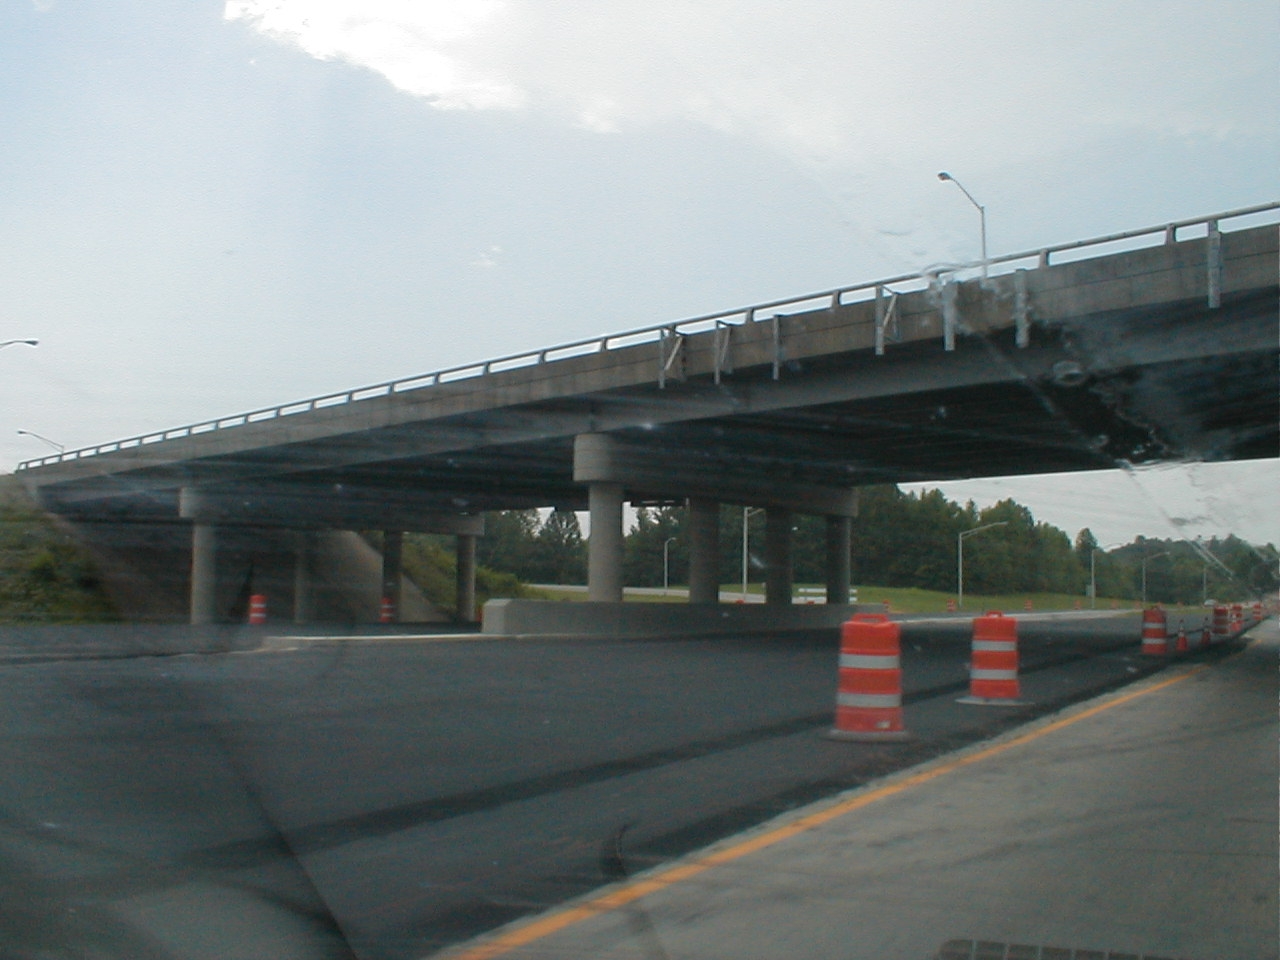 Construction work to remove the tolls at exit 62.